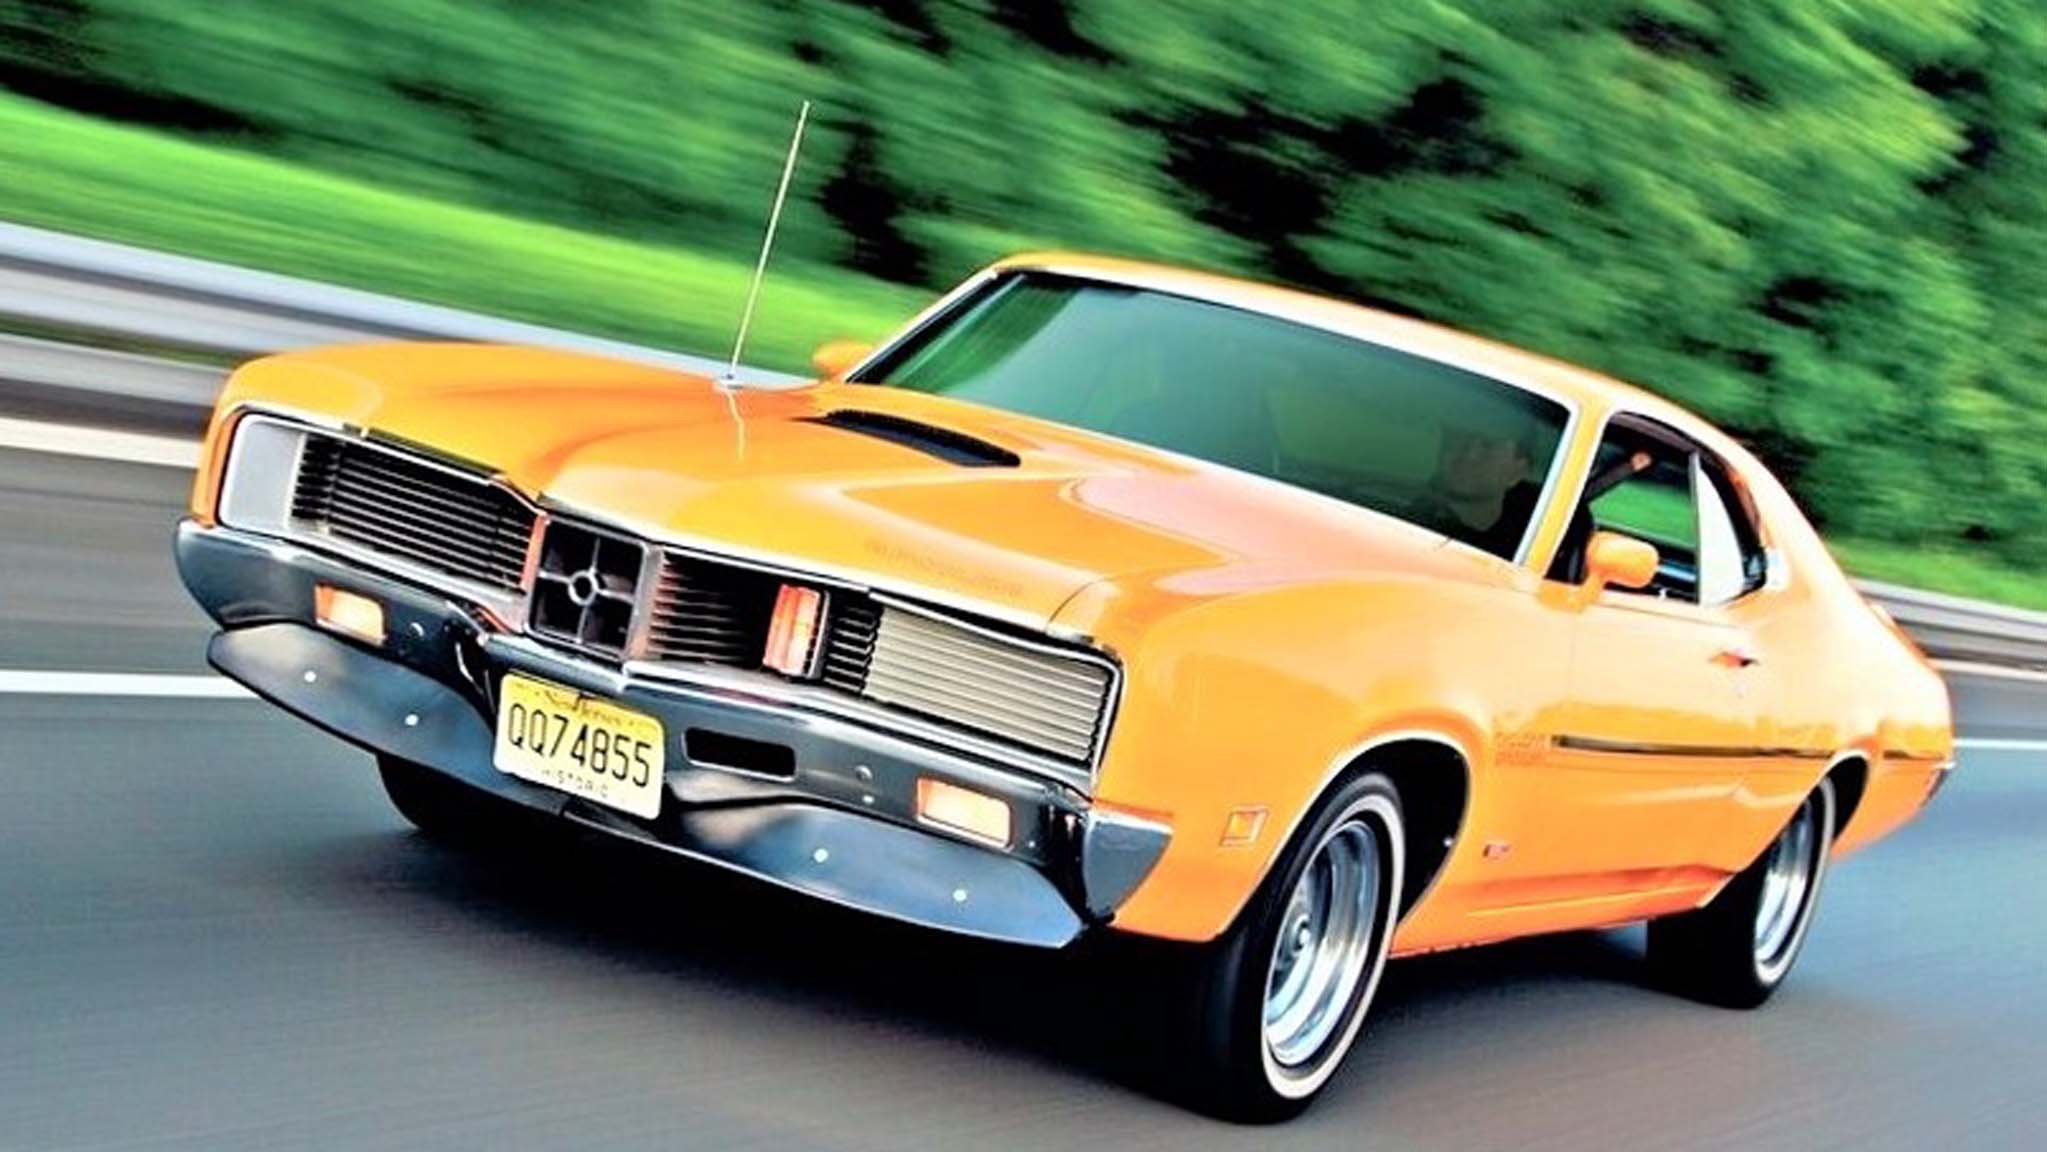 9 Mercury Muscle Cars That Help Tell the Brand's Story